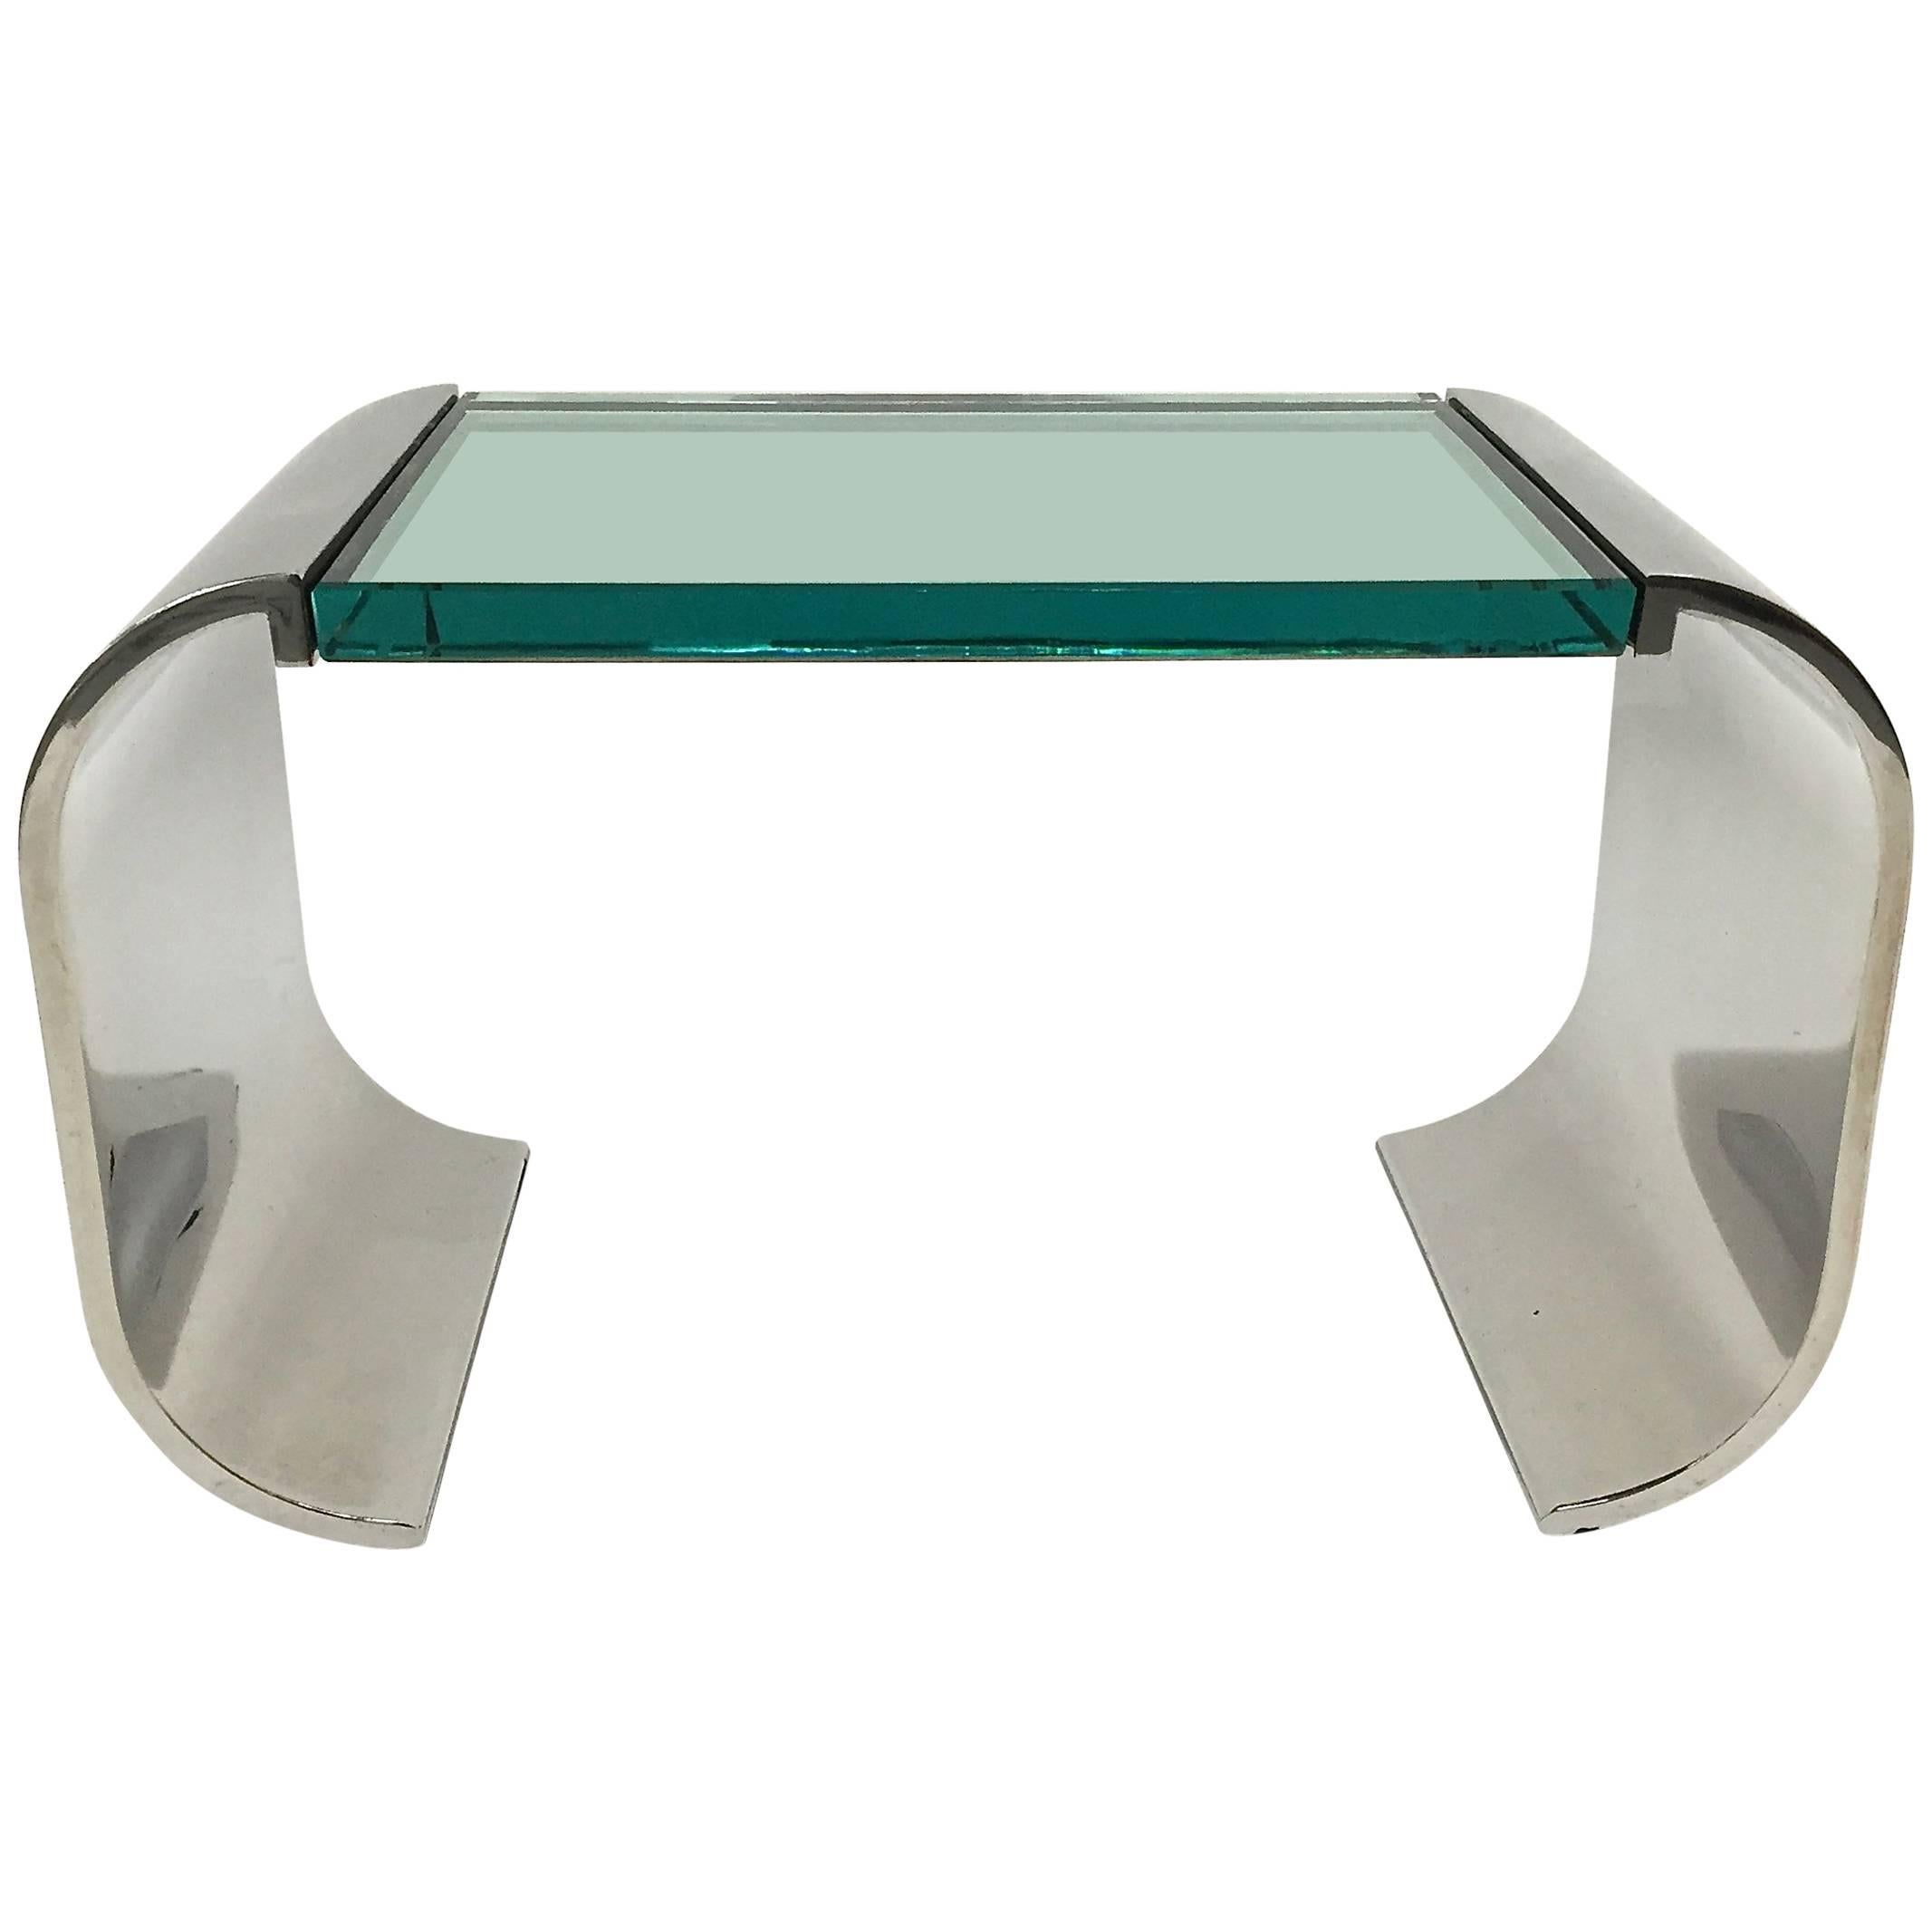 Stanley Jay Friedman for Brueton Stainless Steel and Glass Macao Low Table For Sale